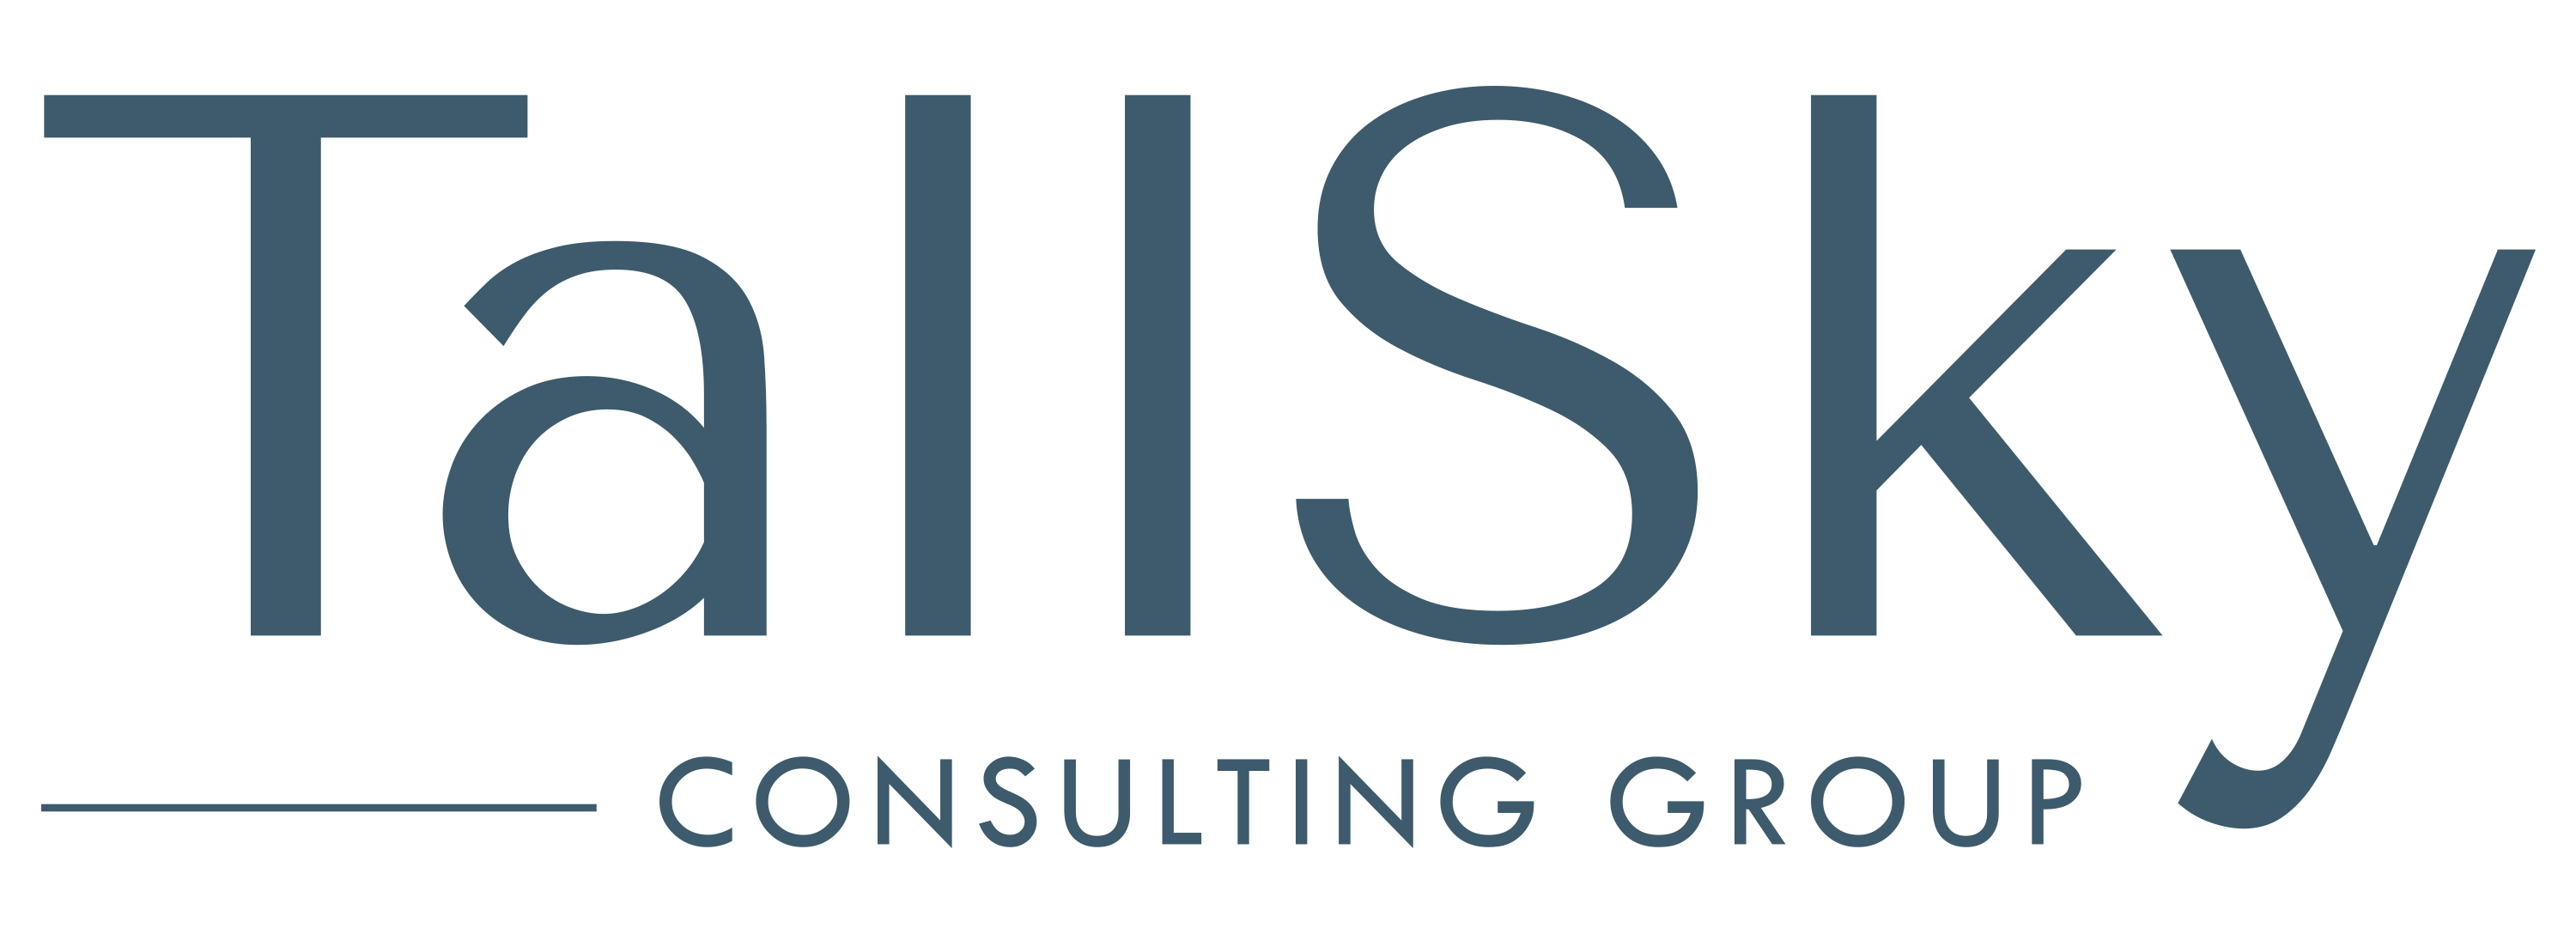 TallSky Consulting Group